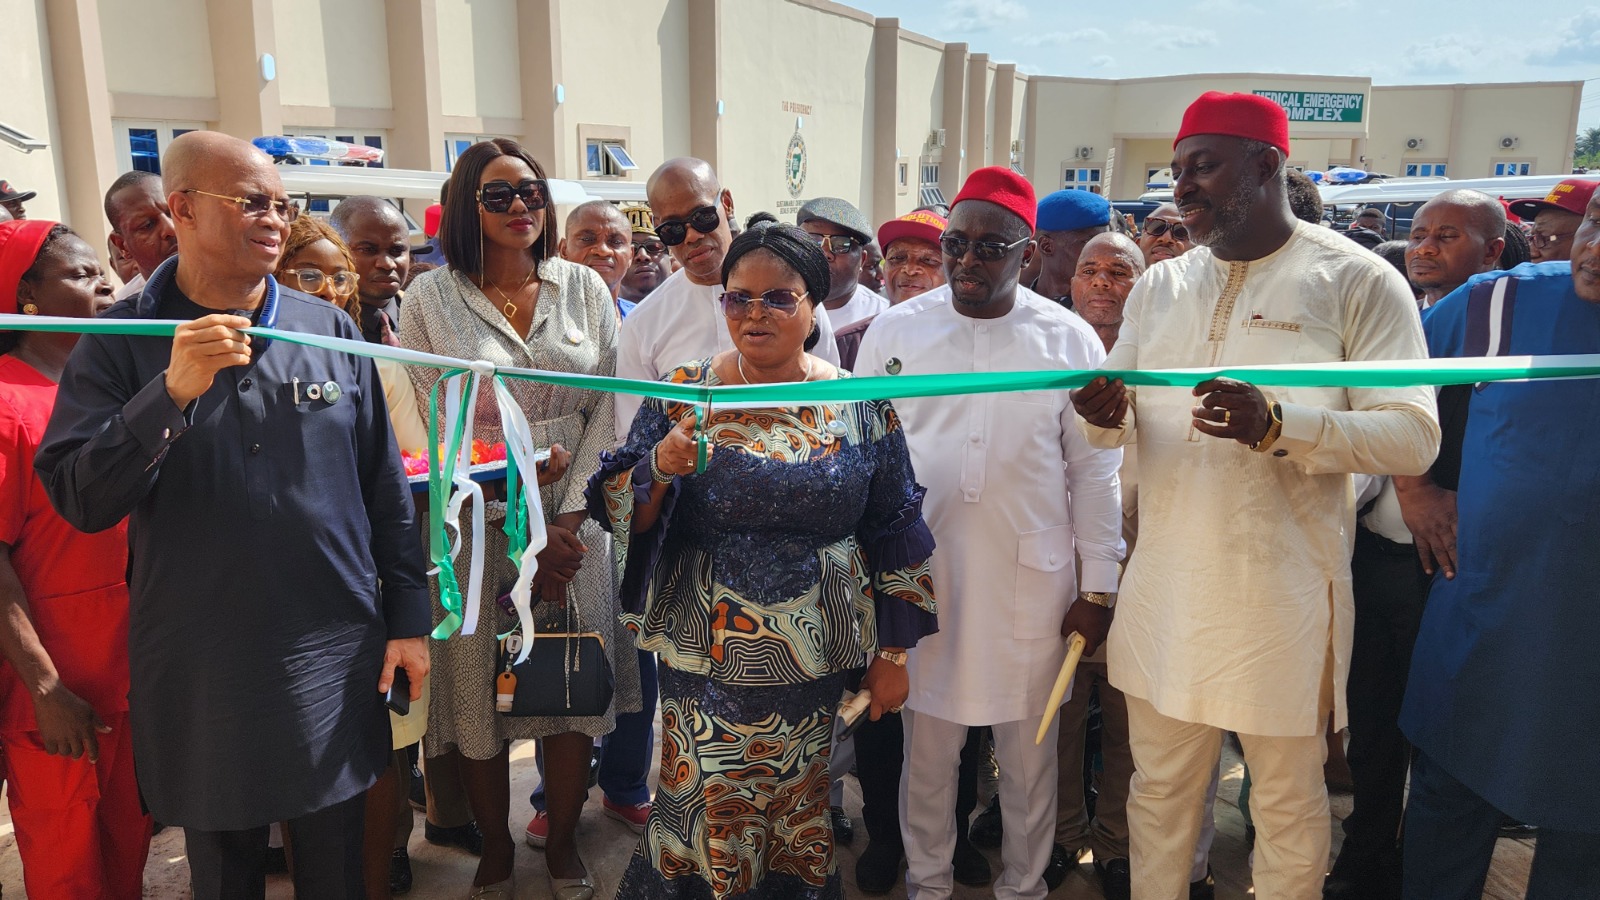 OSSAP-SDGs unveils interventions at the permanent site of Nnamdi Azikiwe University Teaching Hospital (NAUTH), Nnewi, Anambra State.